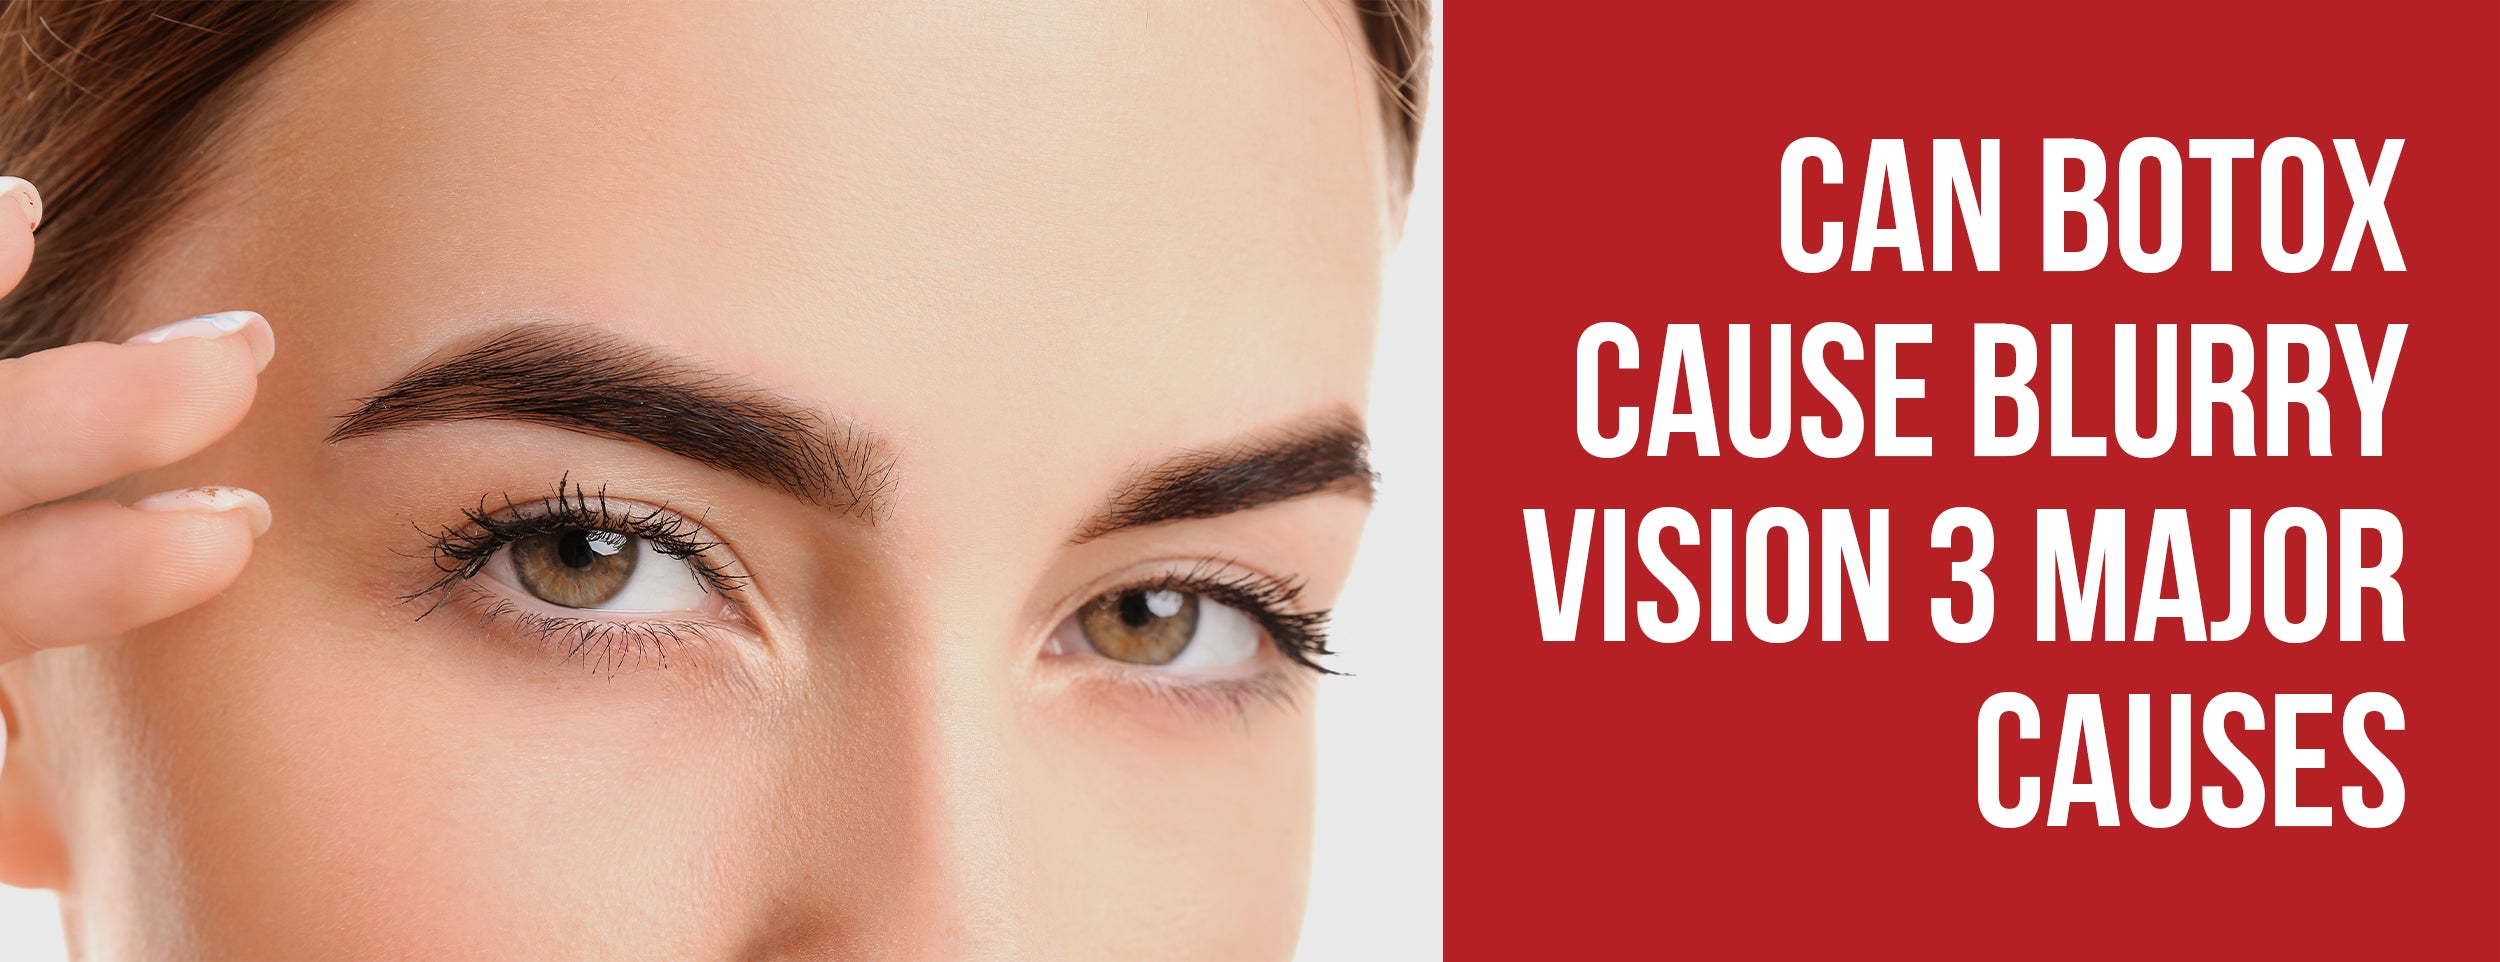 Can Botox Cause Blurry Vision: 3 Major Causes